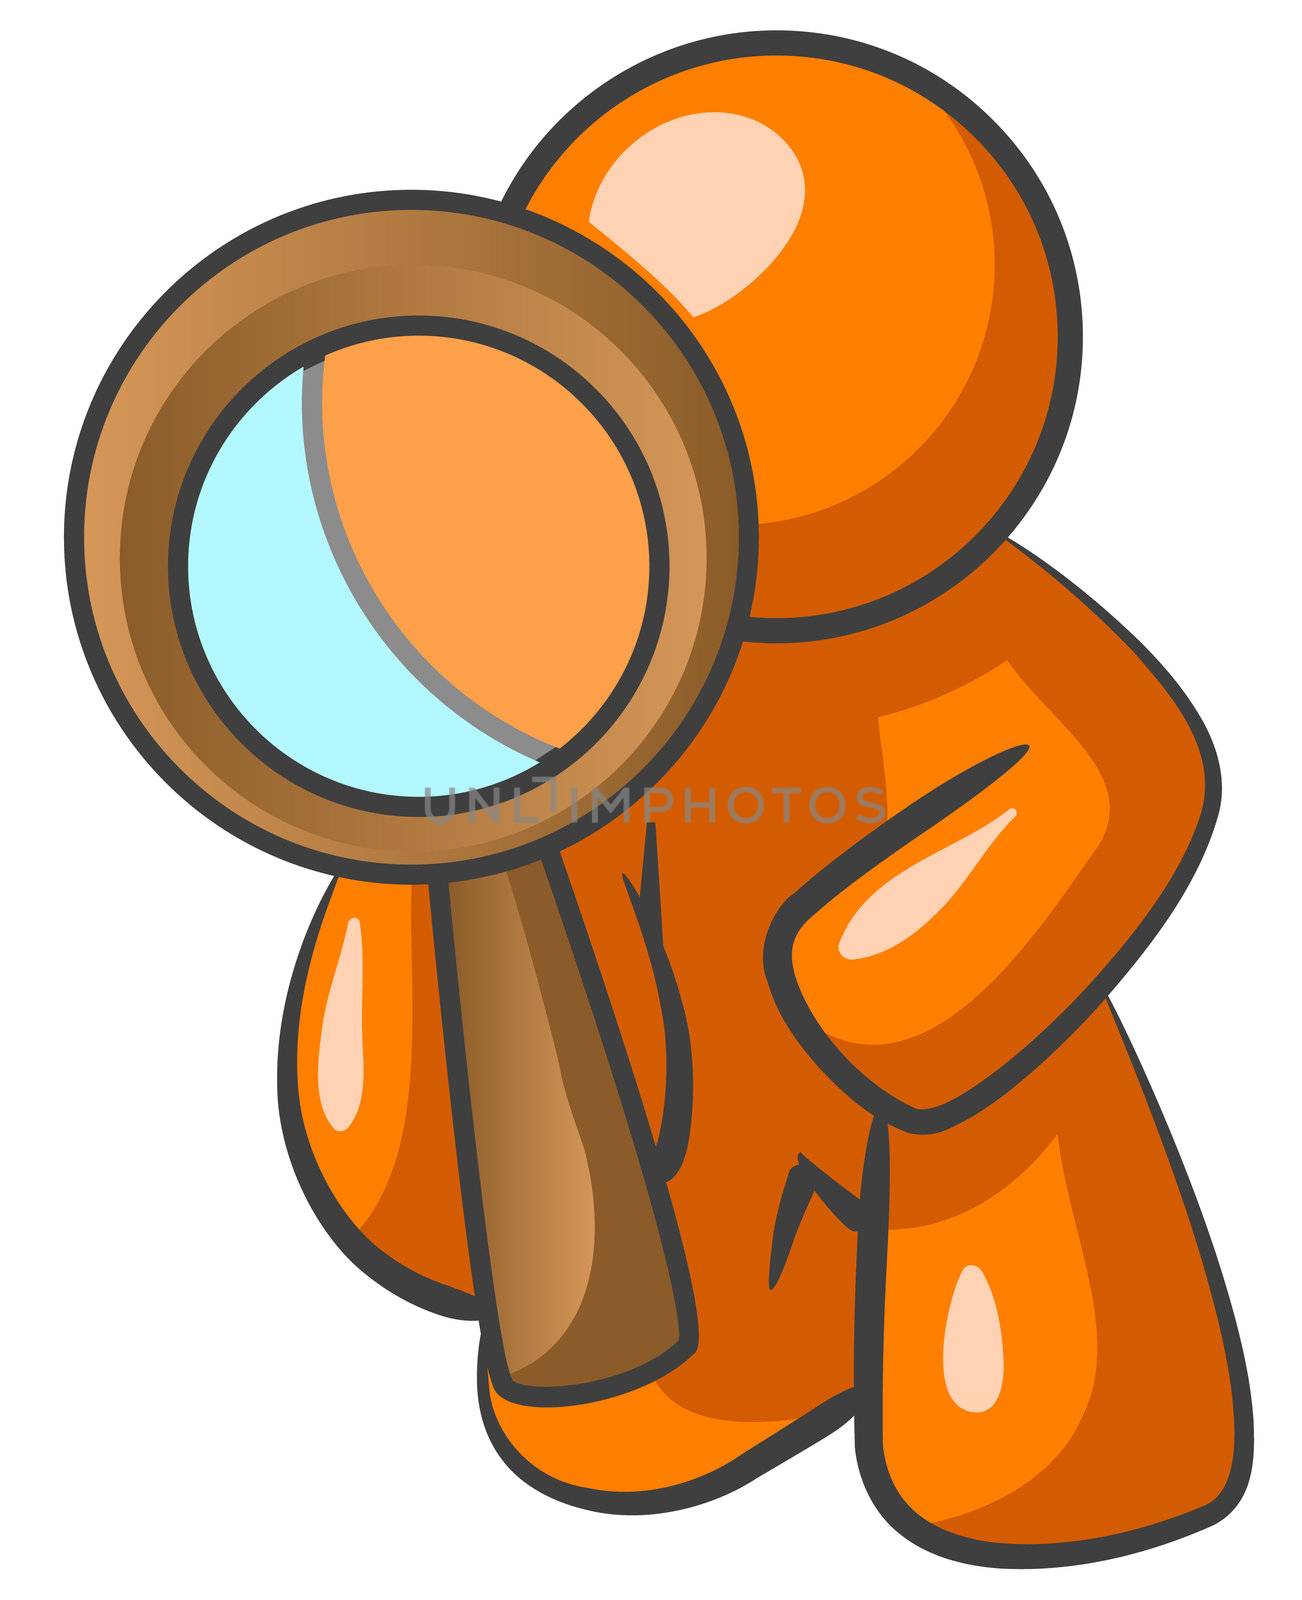 Orange Man Looking Through Magnifying Glass by LeoBlanchette